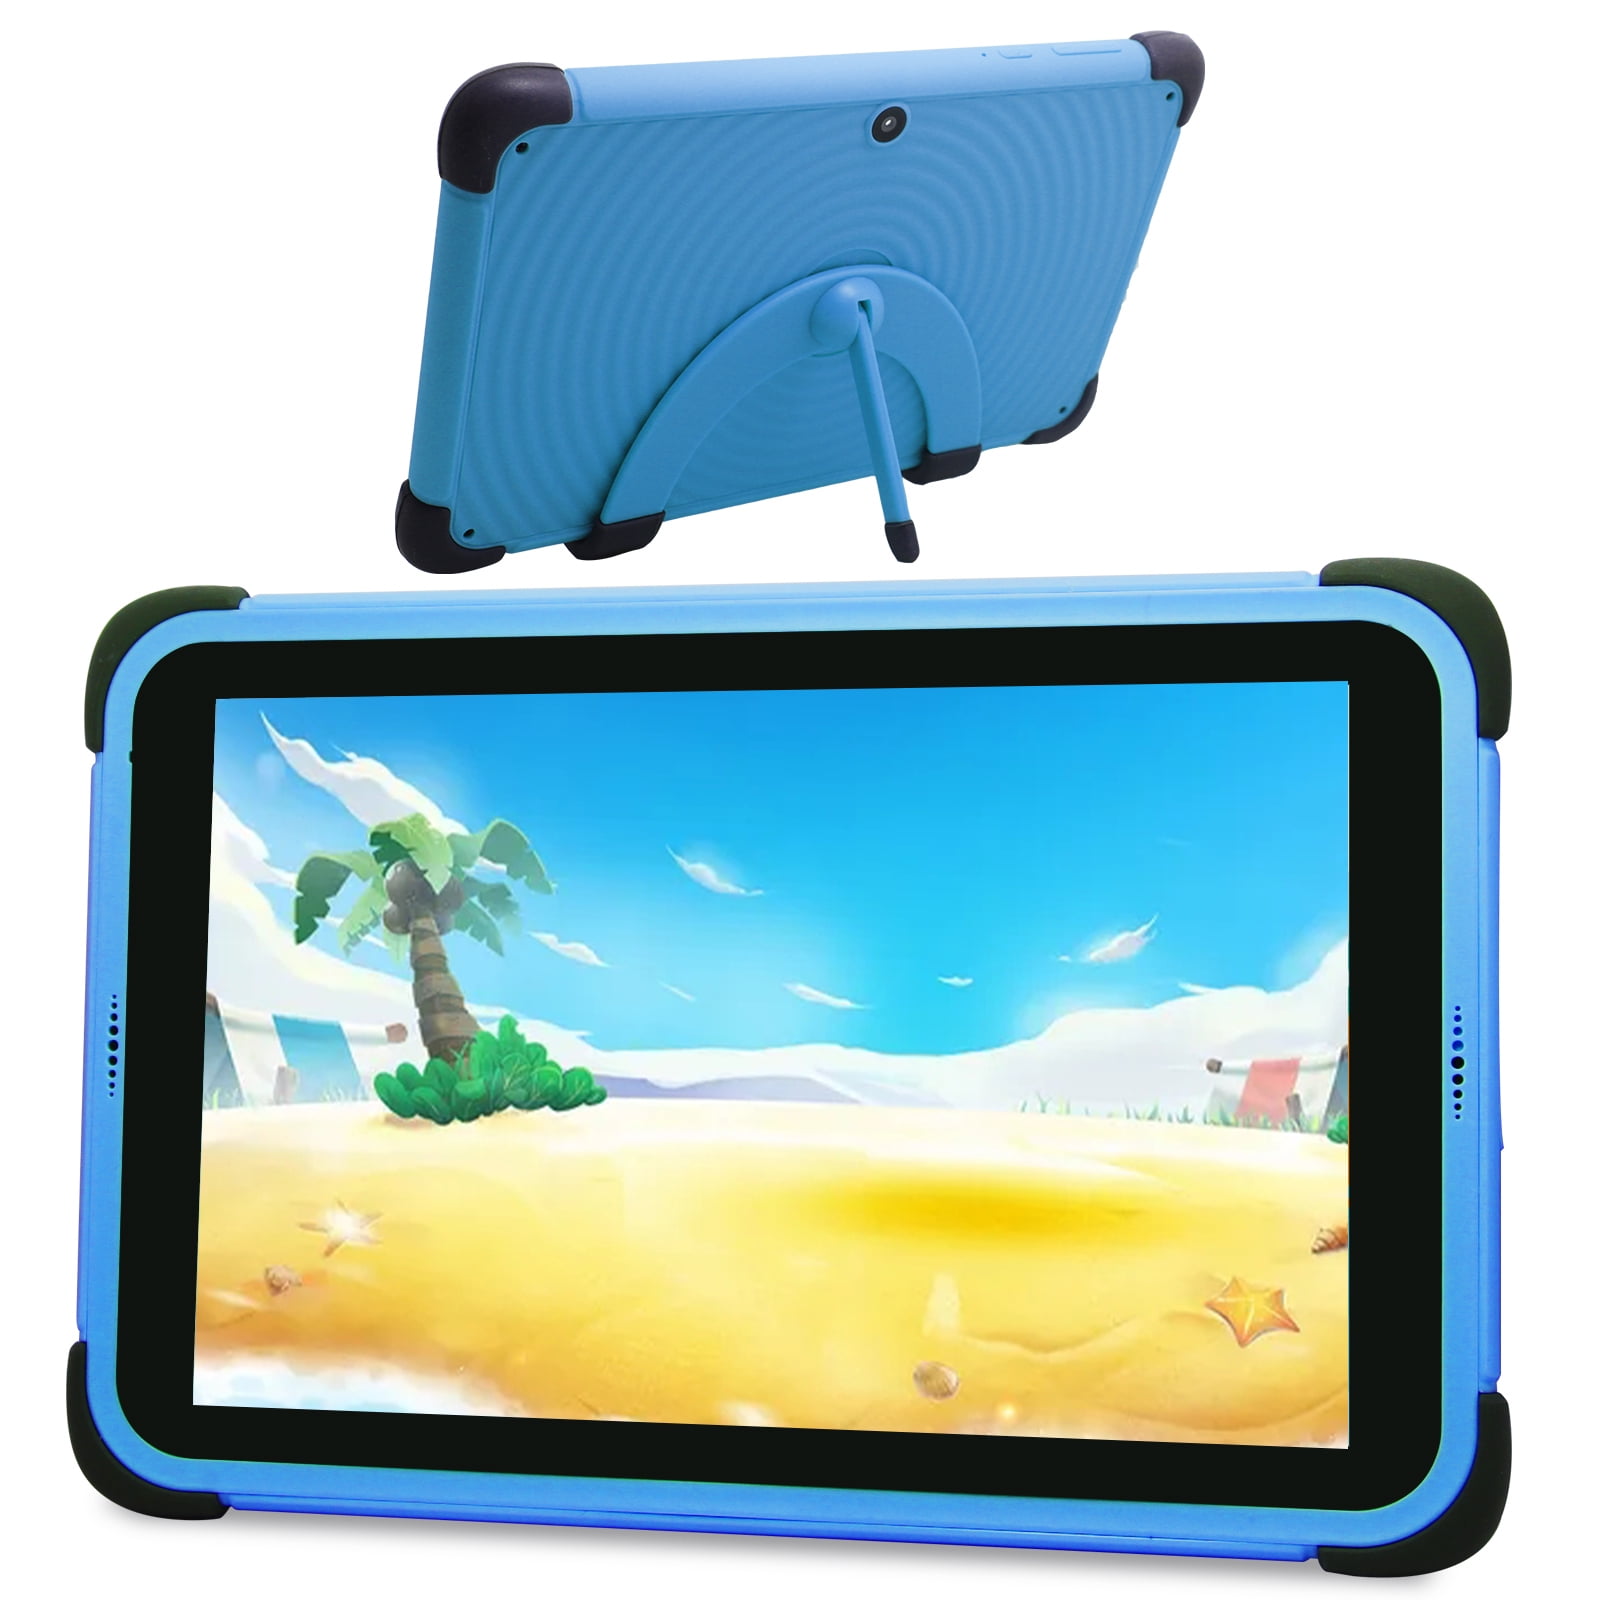 Kids Tablet 8 Inch Android 11 Tablet 2GB RAM 32GB ROM 8 HD Display WiFi ...